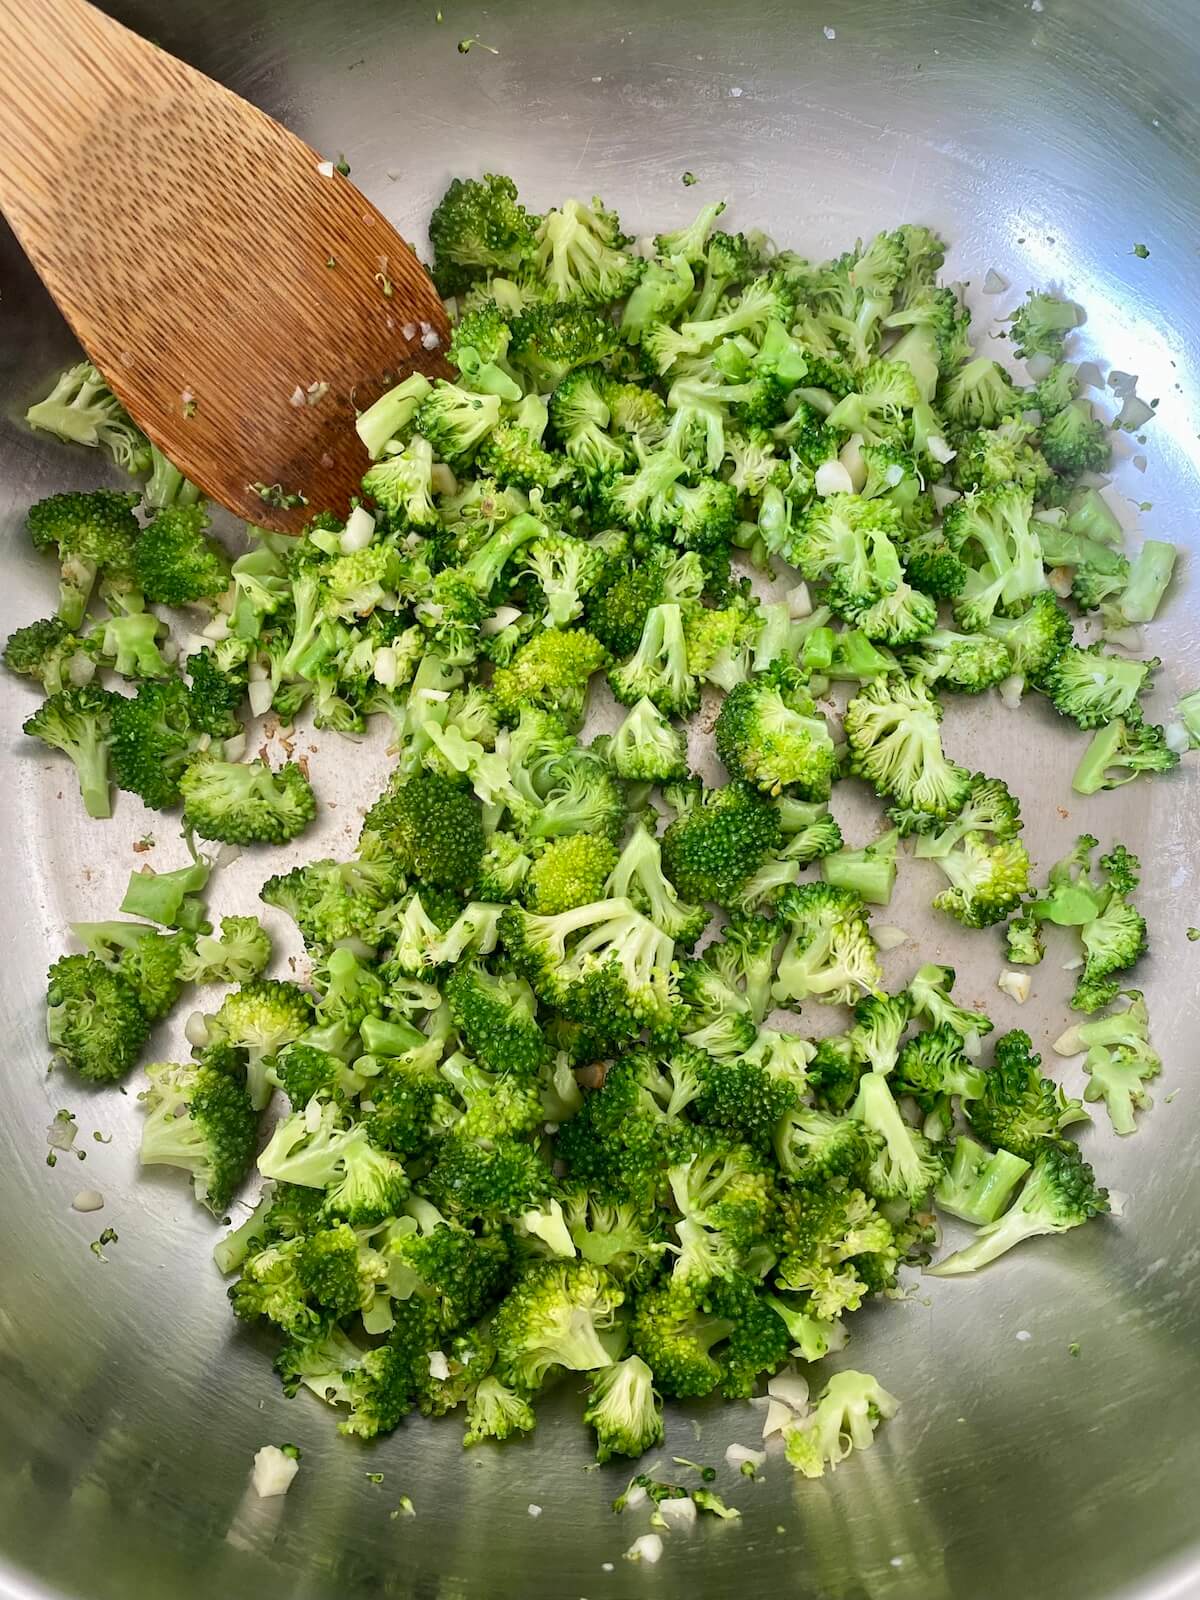 Chopped fresh broccoli and garlic being sautéed in a stainless steel skillet.